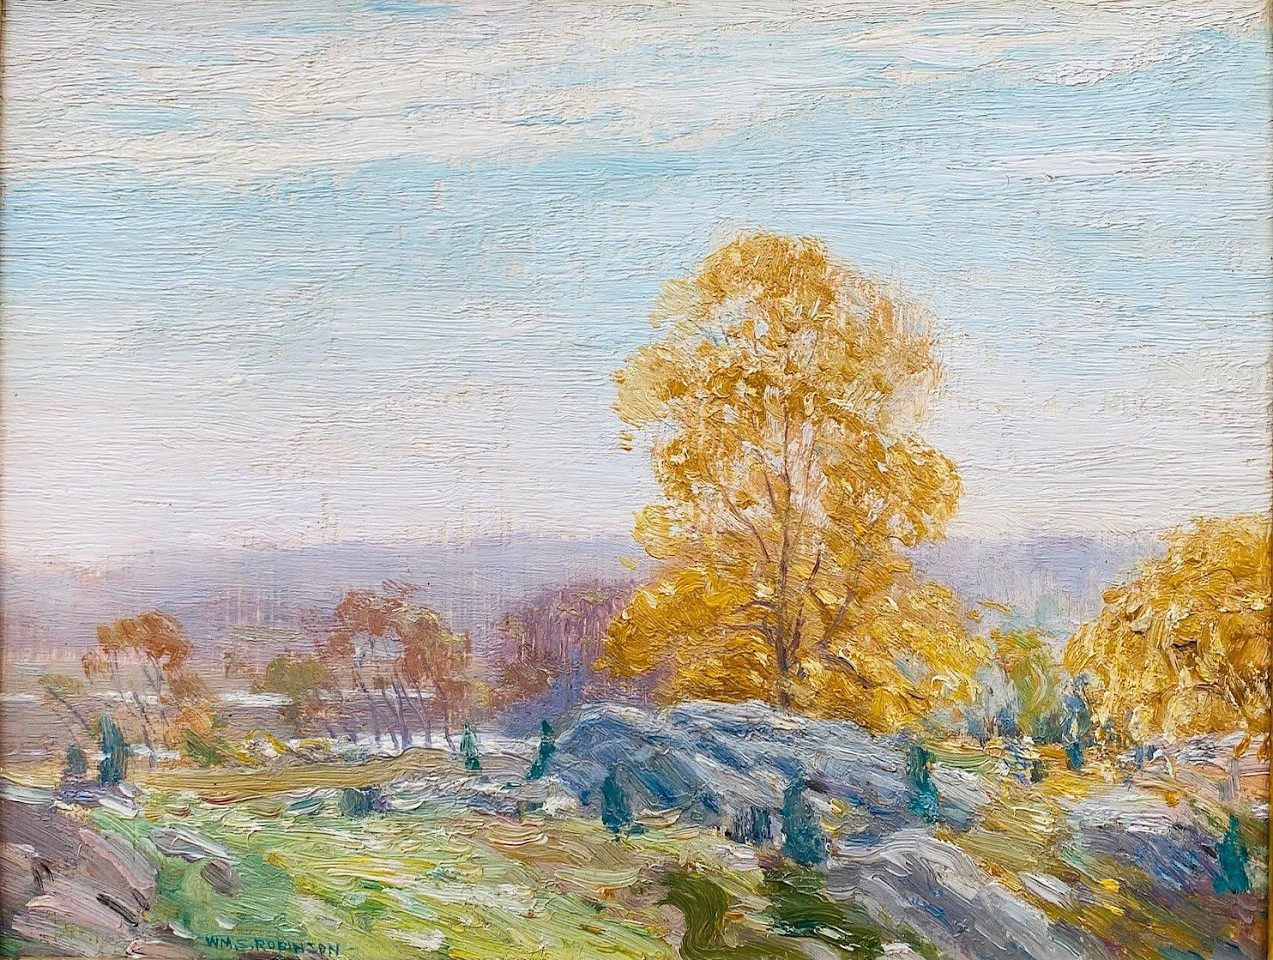 William S. Robinson, October in Old Lyme
oil on board, 8"" x 10:
JCA 6653
$2,750